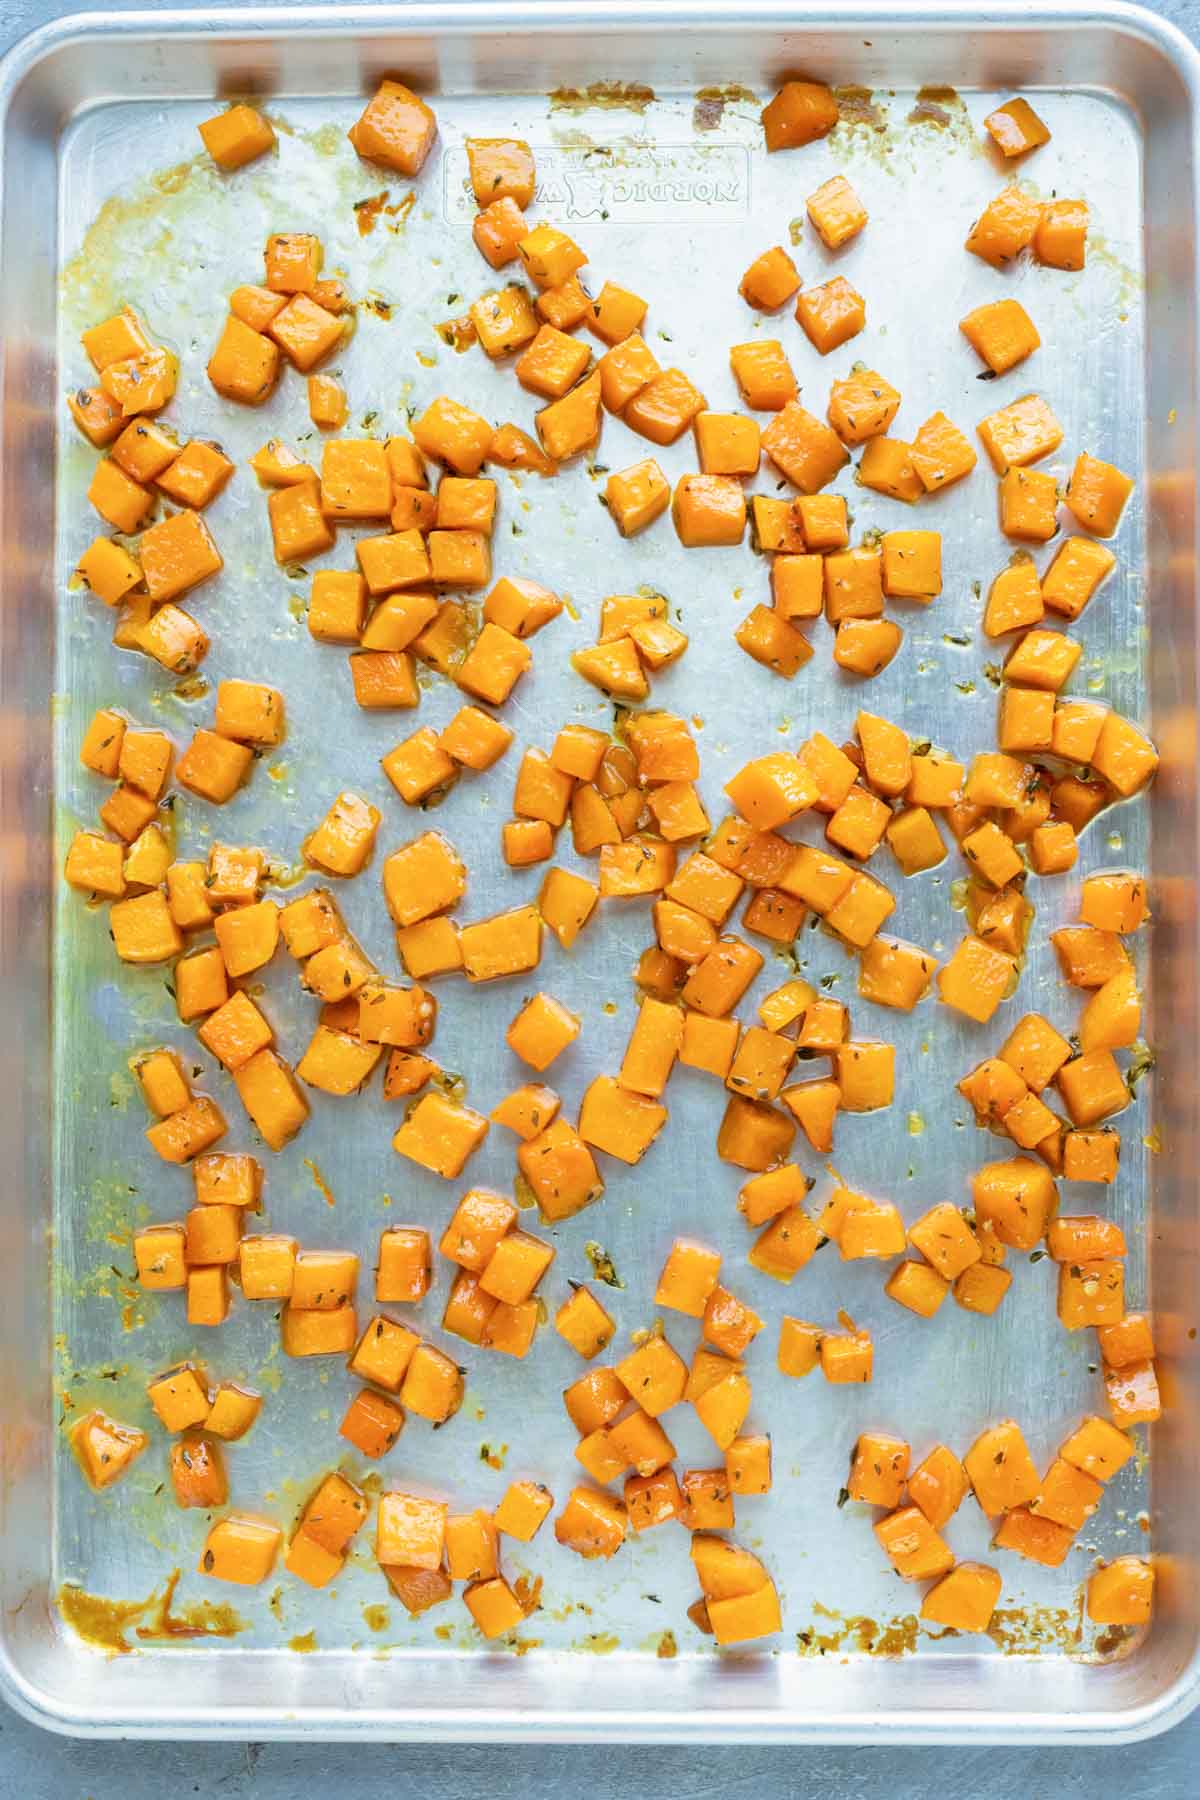 An image of roasted butternut squash cubes on a large baking sheet after baking.